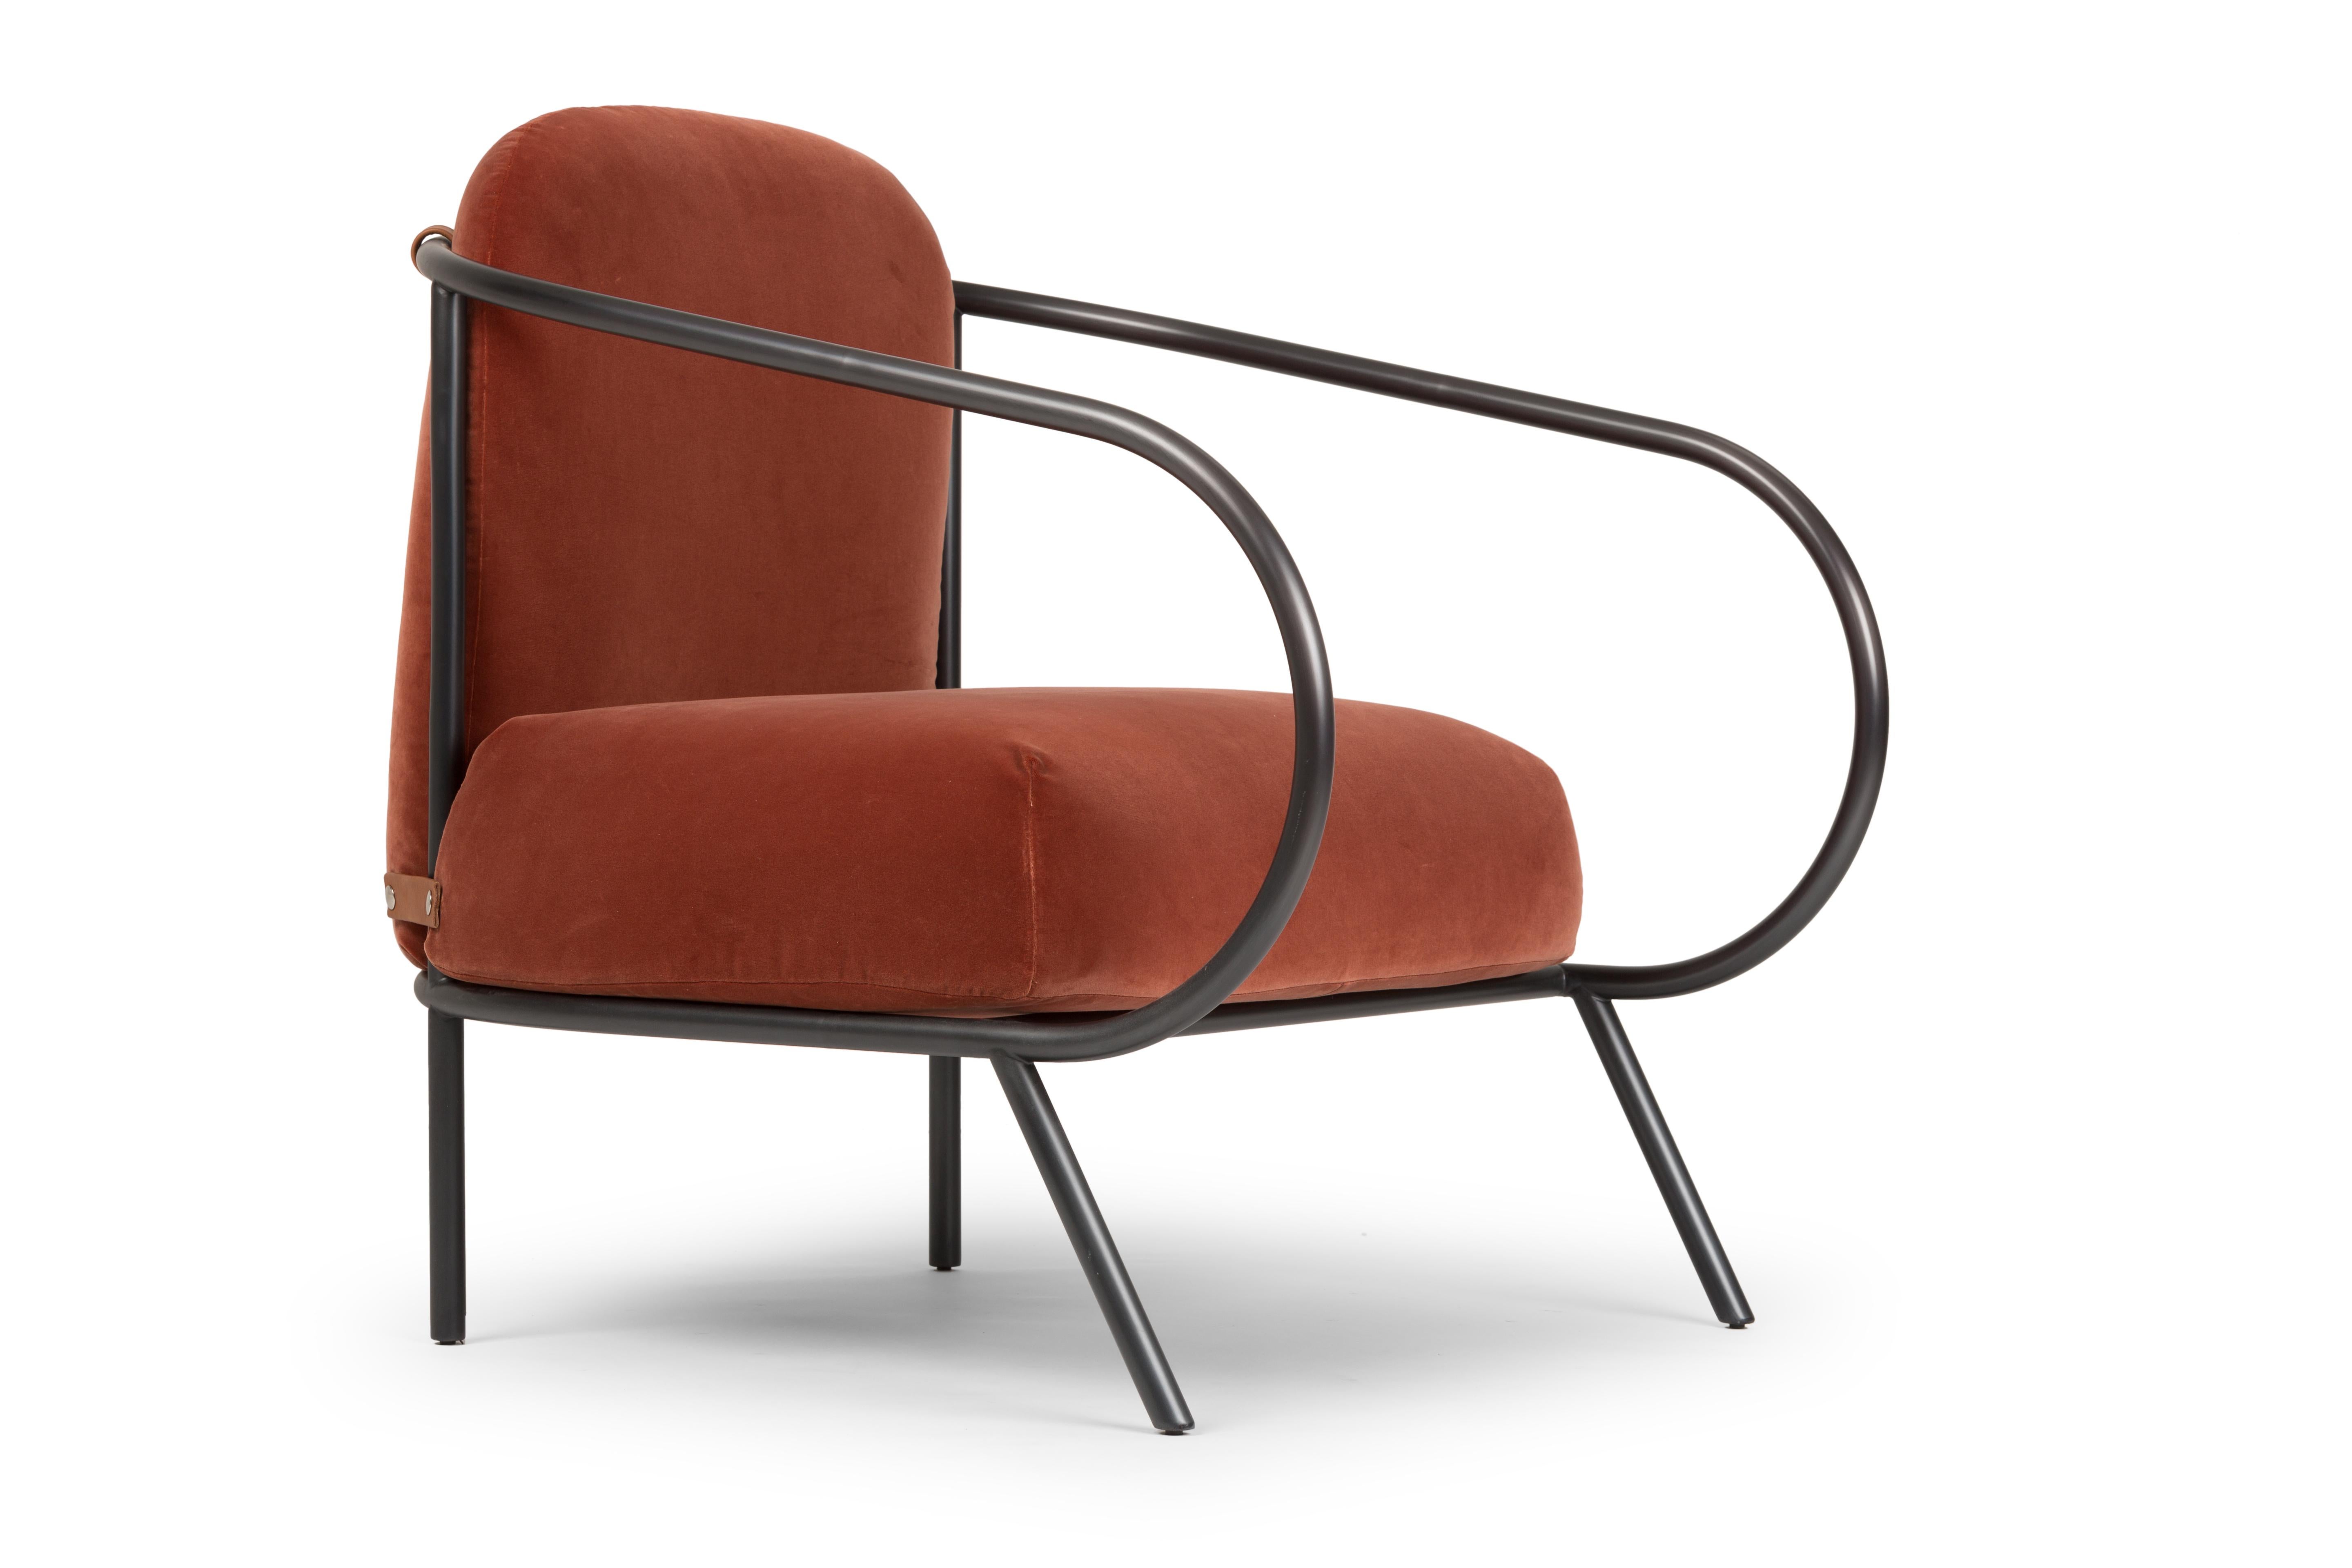 Minima Armchair by Mingardo
Dimensions: D75 x W94 x H79.5 cm 
Materials: Burnished iron structure, Polyurethane with cotton velvet fabric [Customizable fabrics and colors]
Weight: 15 kg
Also Available in different finishes. 

Minima is the